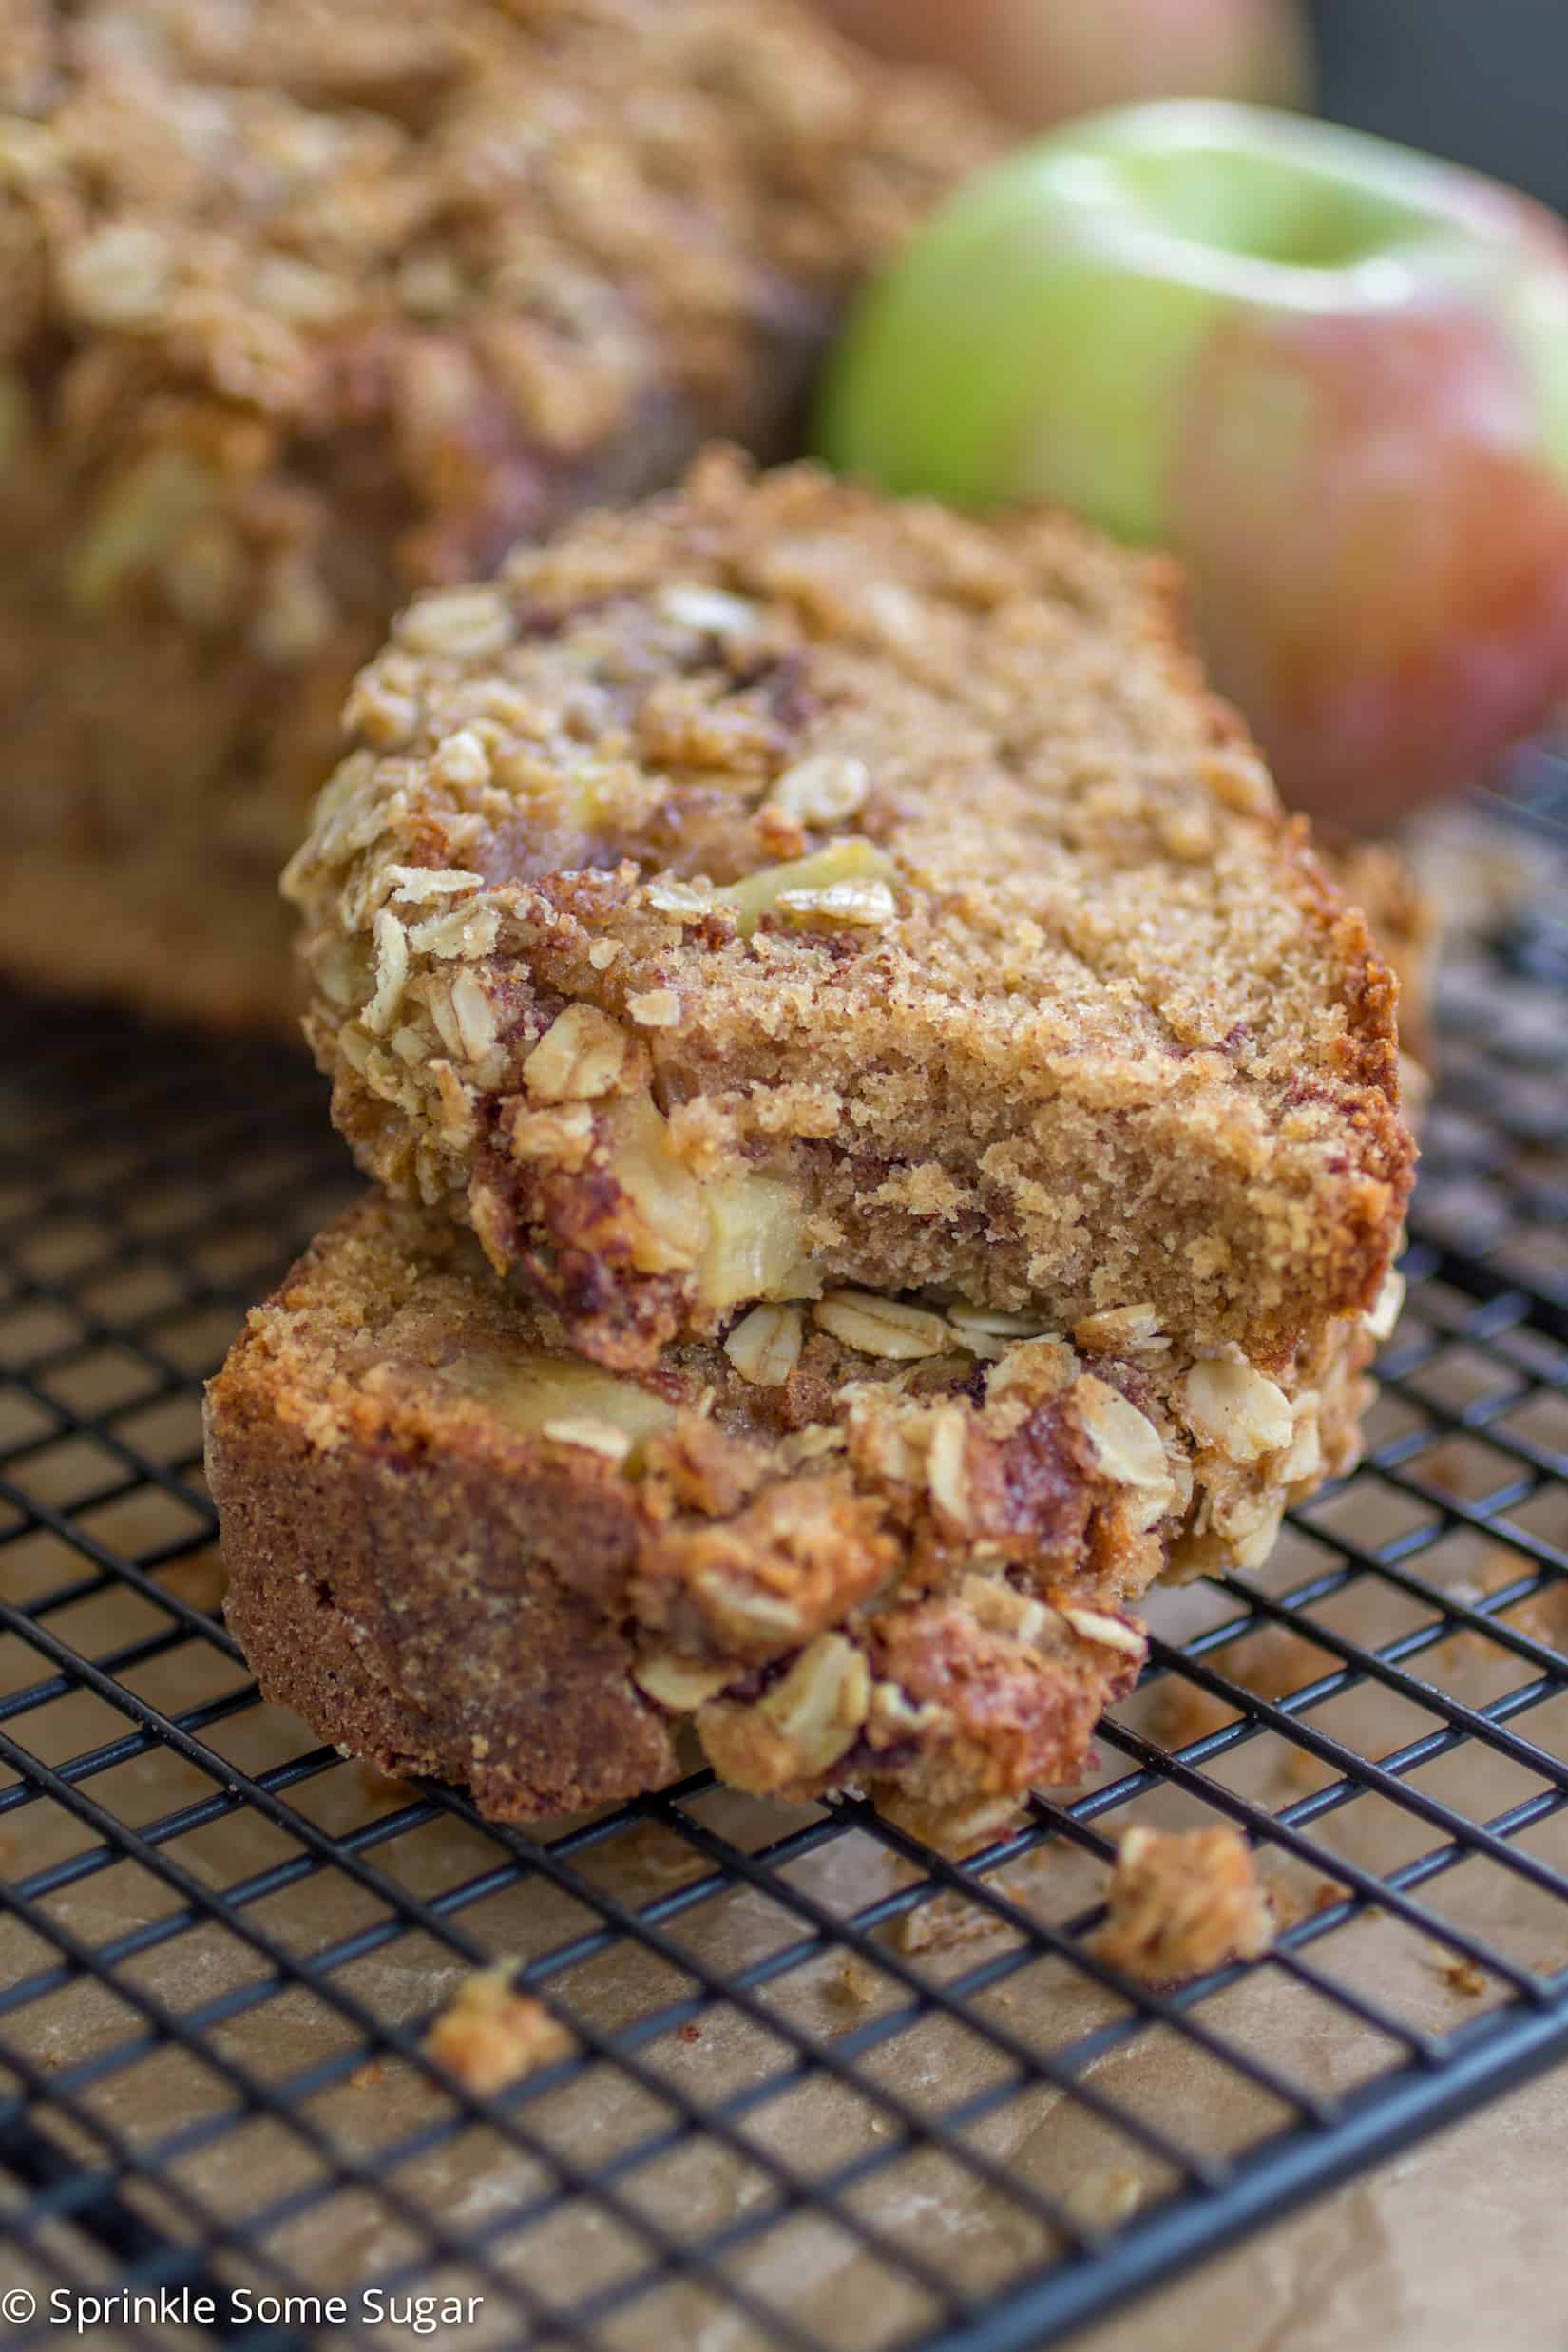 Apple Cinnamon Streusel Bread - The softest bread filled with warm spices, tender apples and topped with a sweet streusel topping.